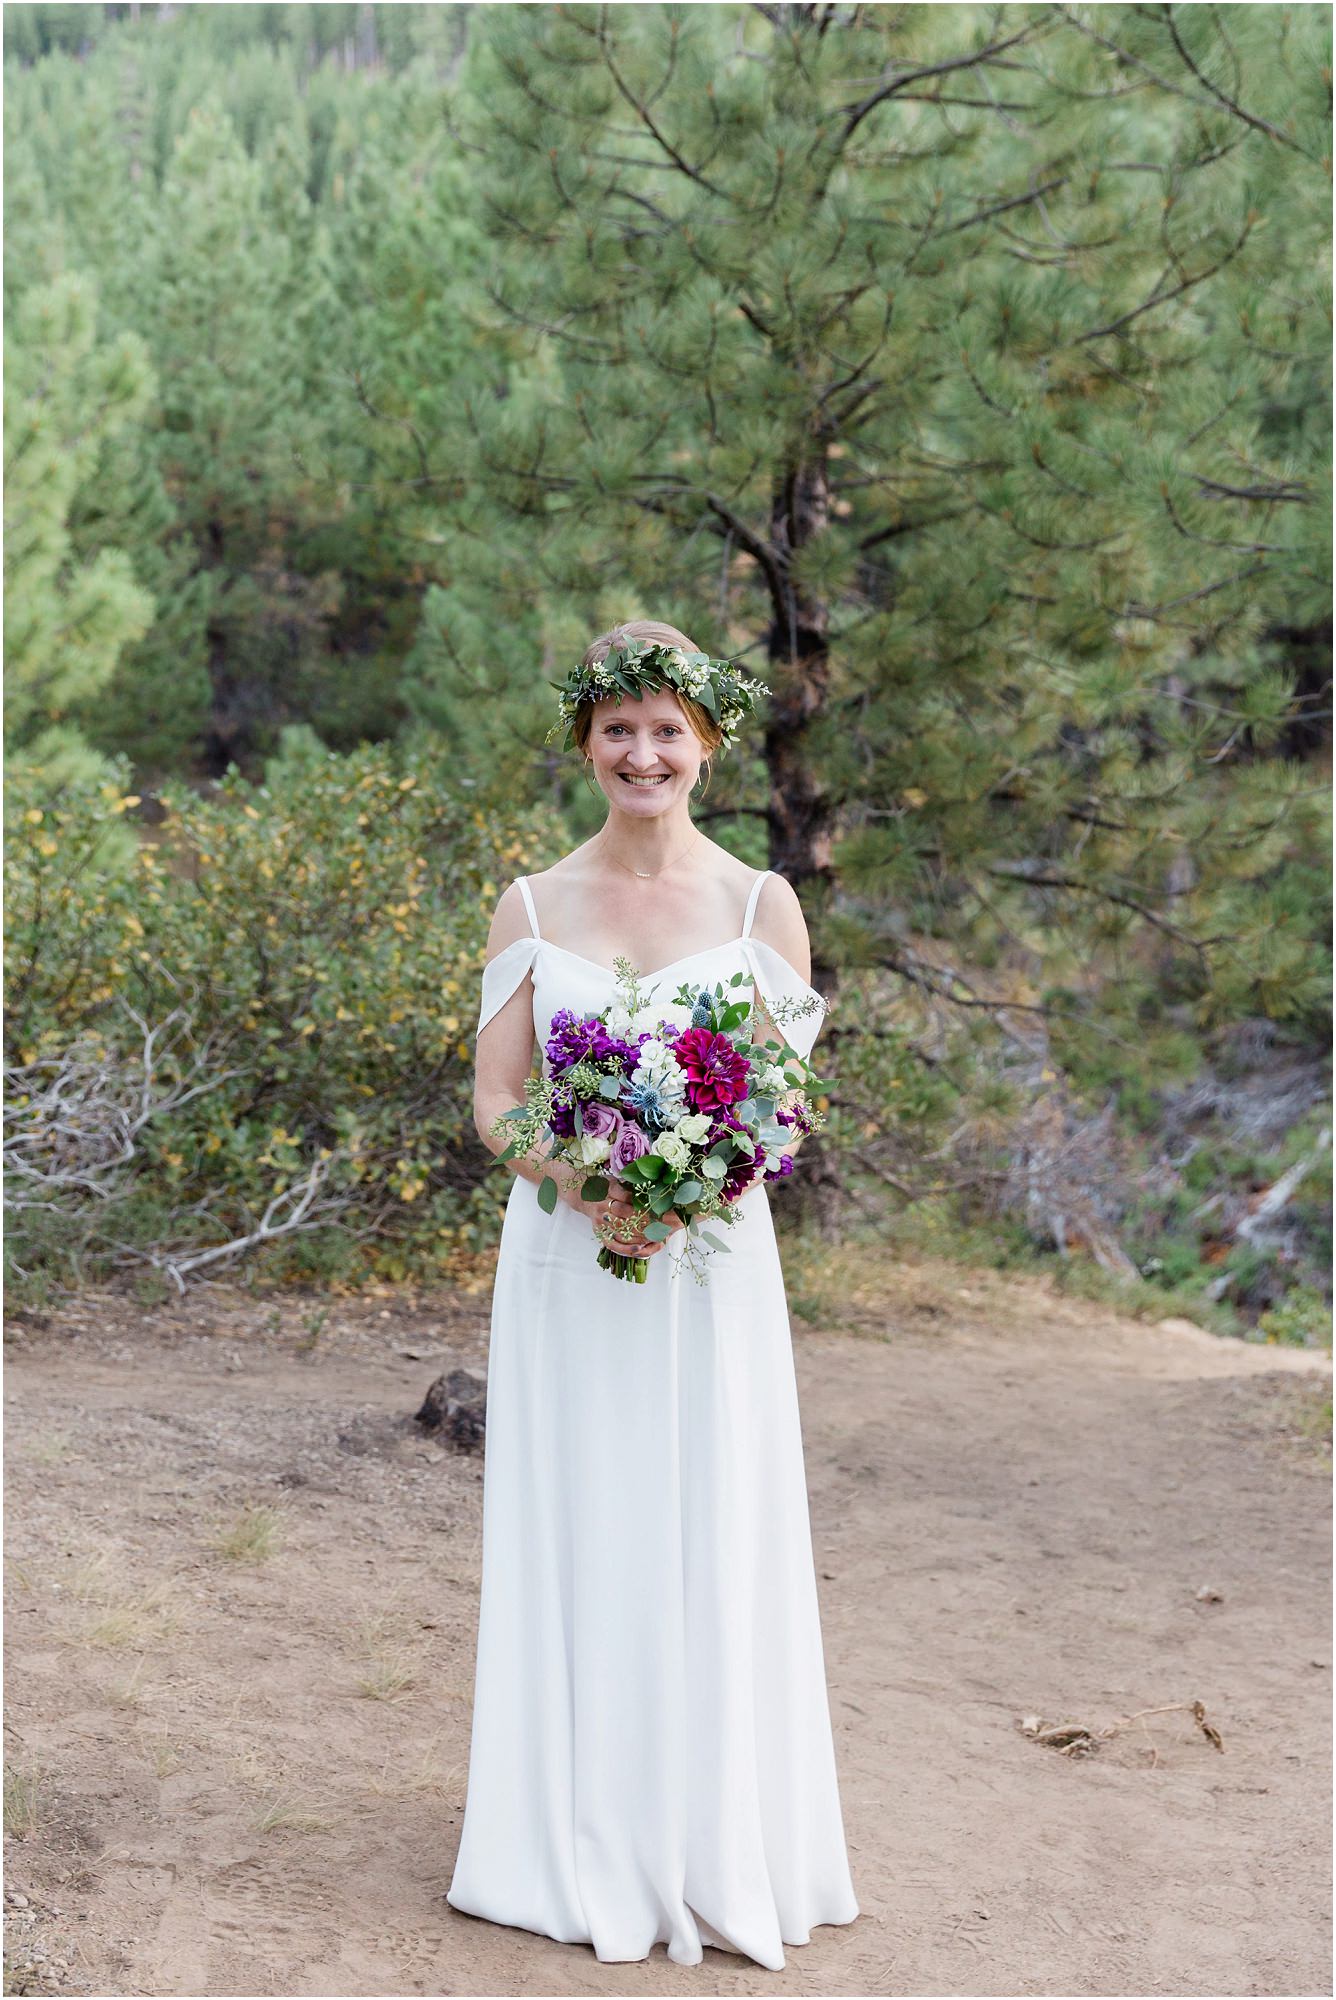 A gorgeous bride wearing a white flutter sleeve dress holds a bouquet of purple dahlias and green succulents while wearing a flower crown made of eucalyptus leaves and baby's breath at her Bend Oregon elopement. | Erica Swantek Photography 